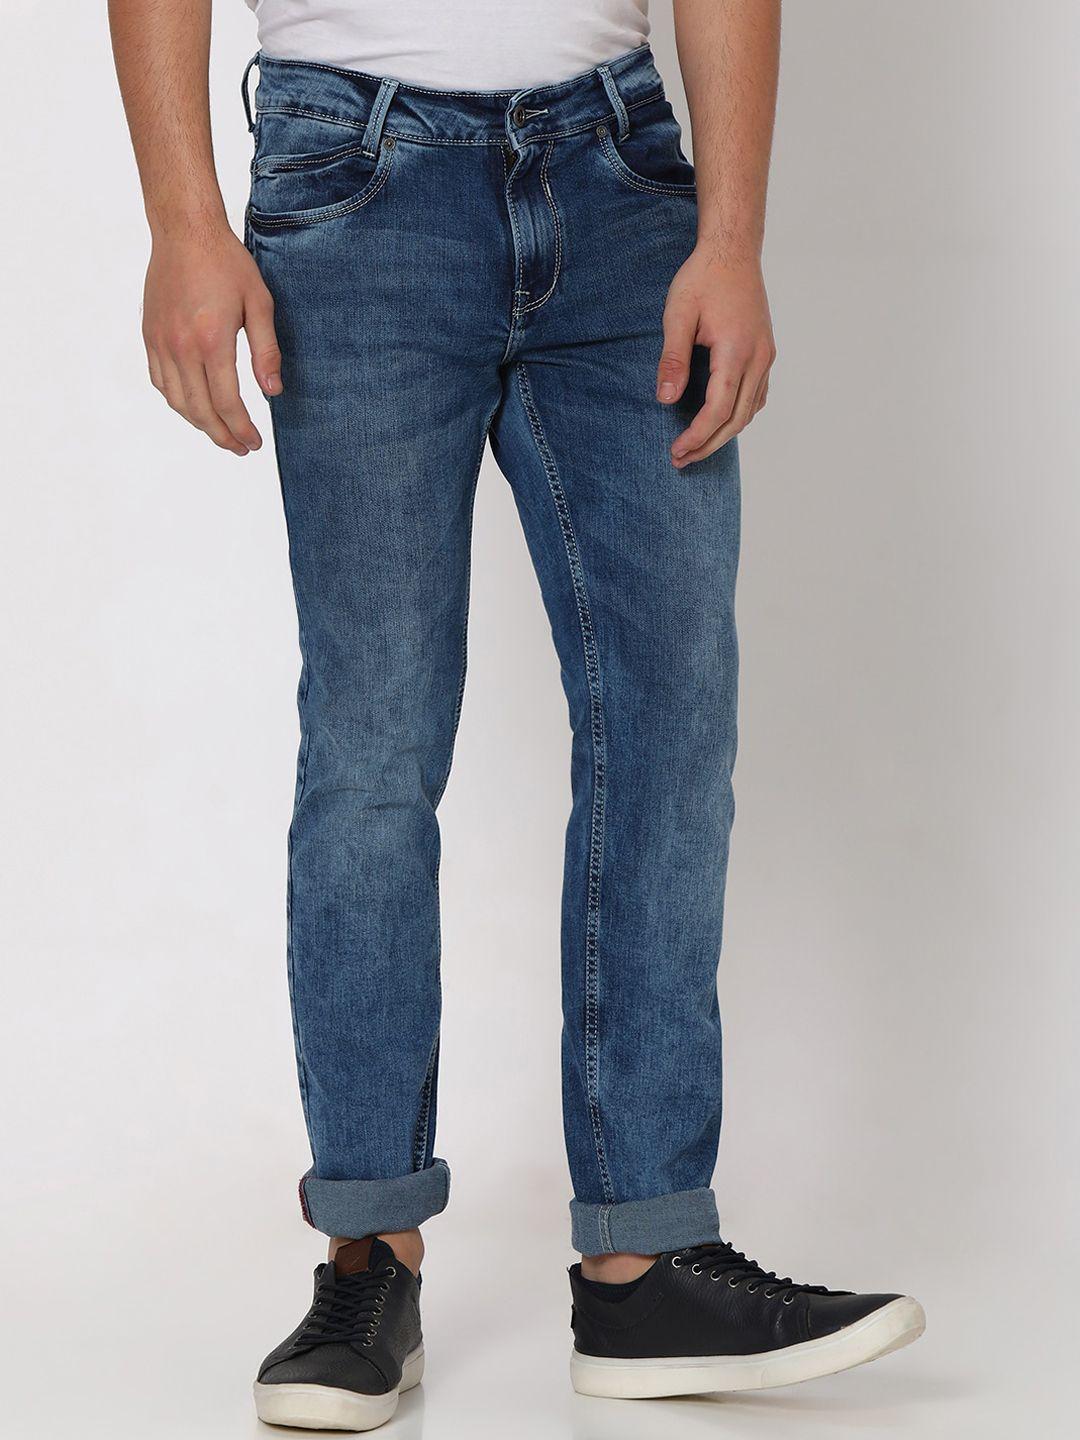 mufti-men-mid-rise-heavy-fade-slim-fit-stretchable-jeans